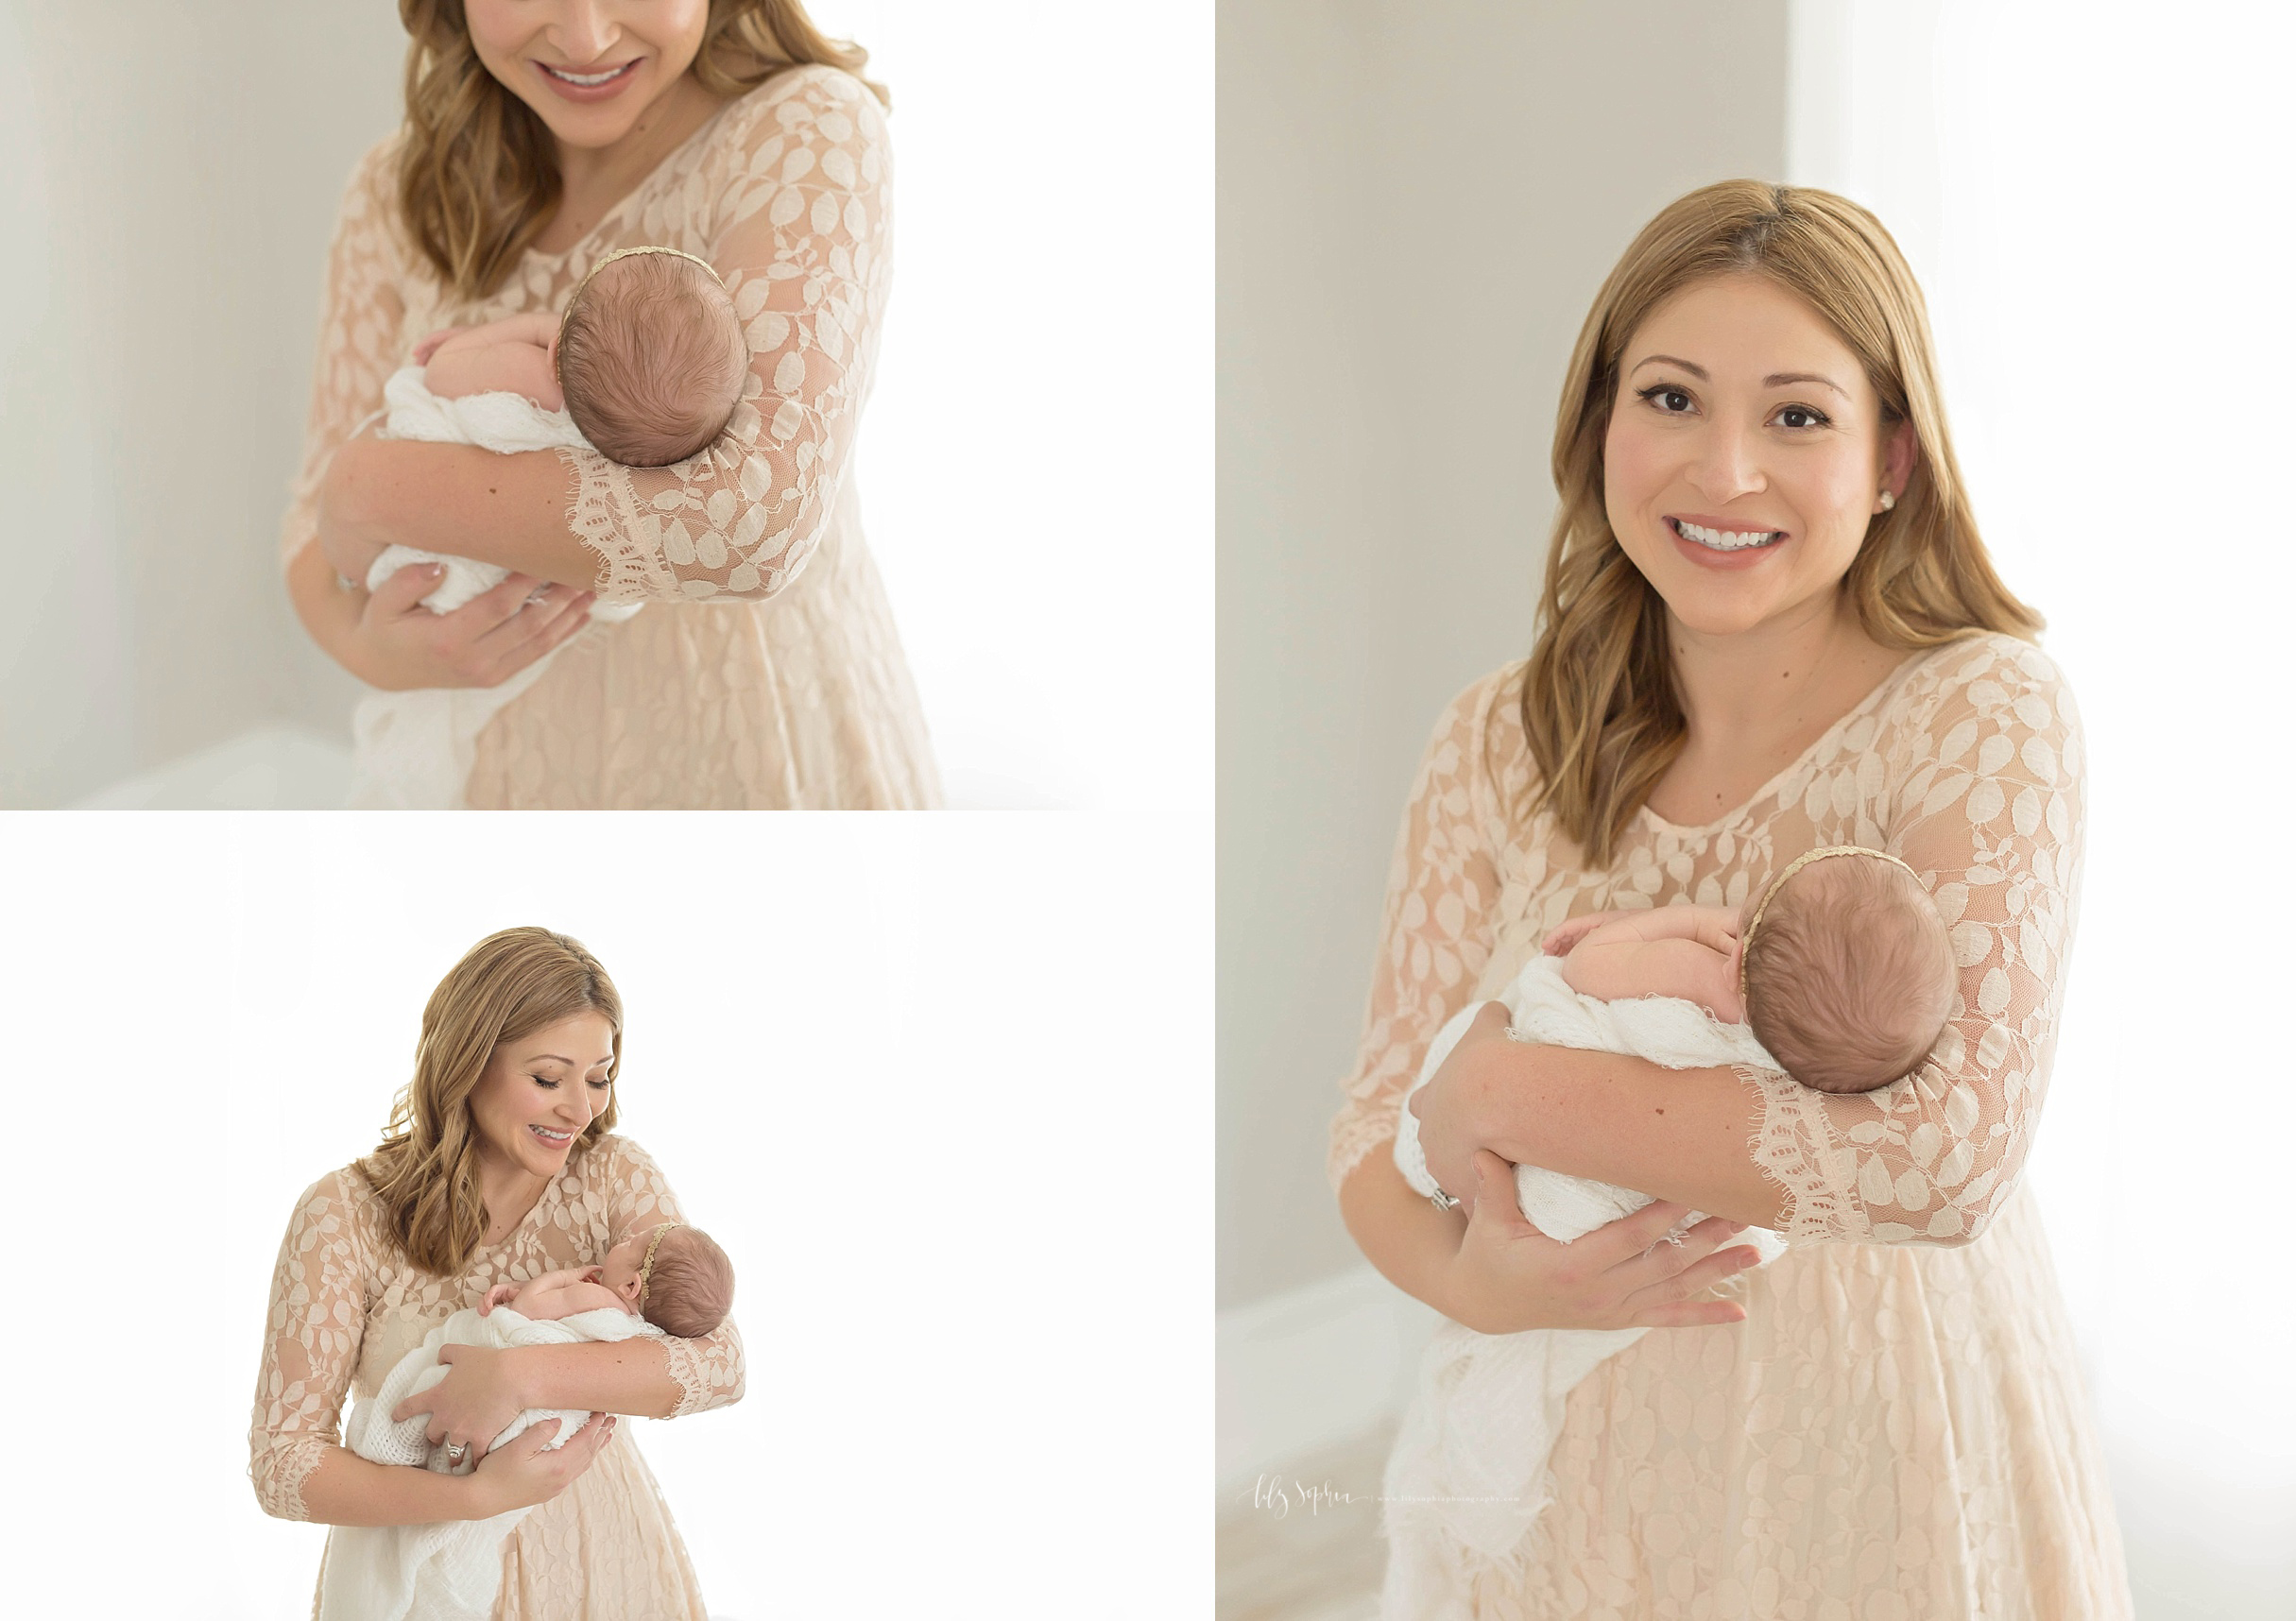  Image collage of a new mother, cradling her newborn, baby, daughter in her arms and smiling.&nbsp; 